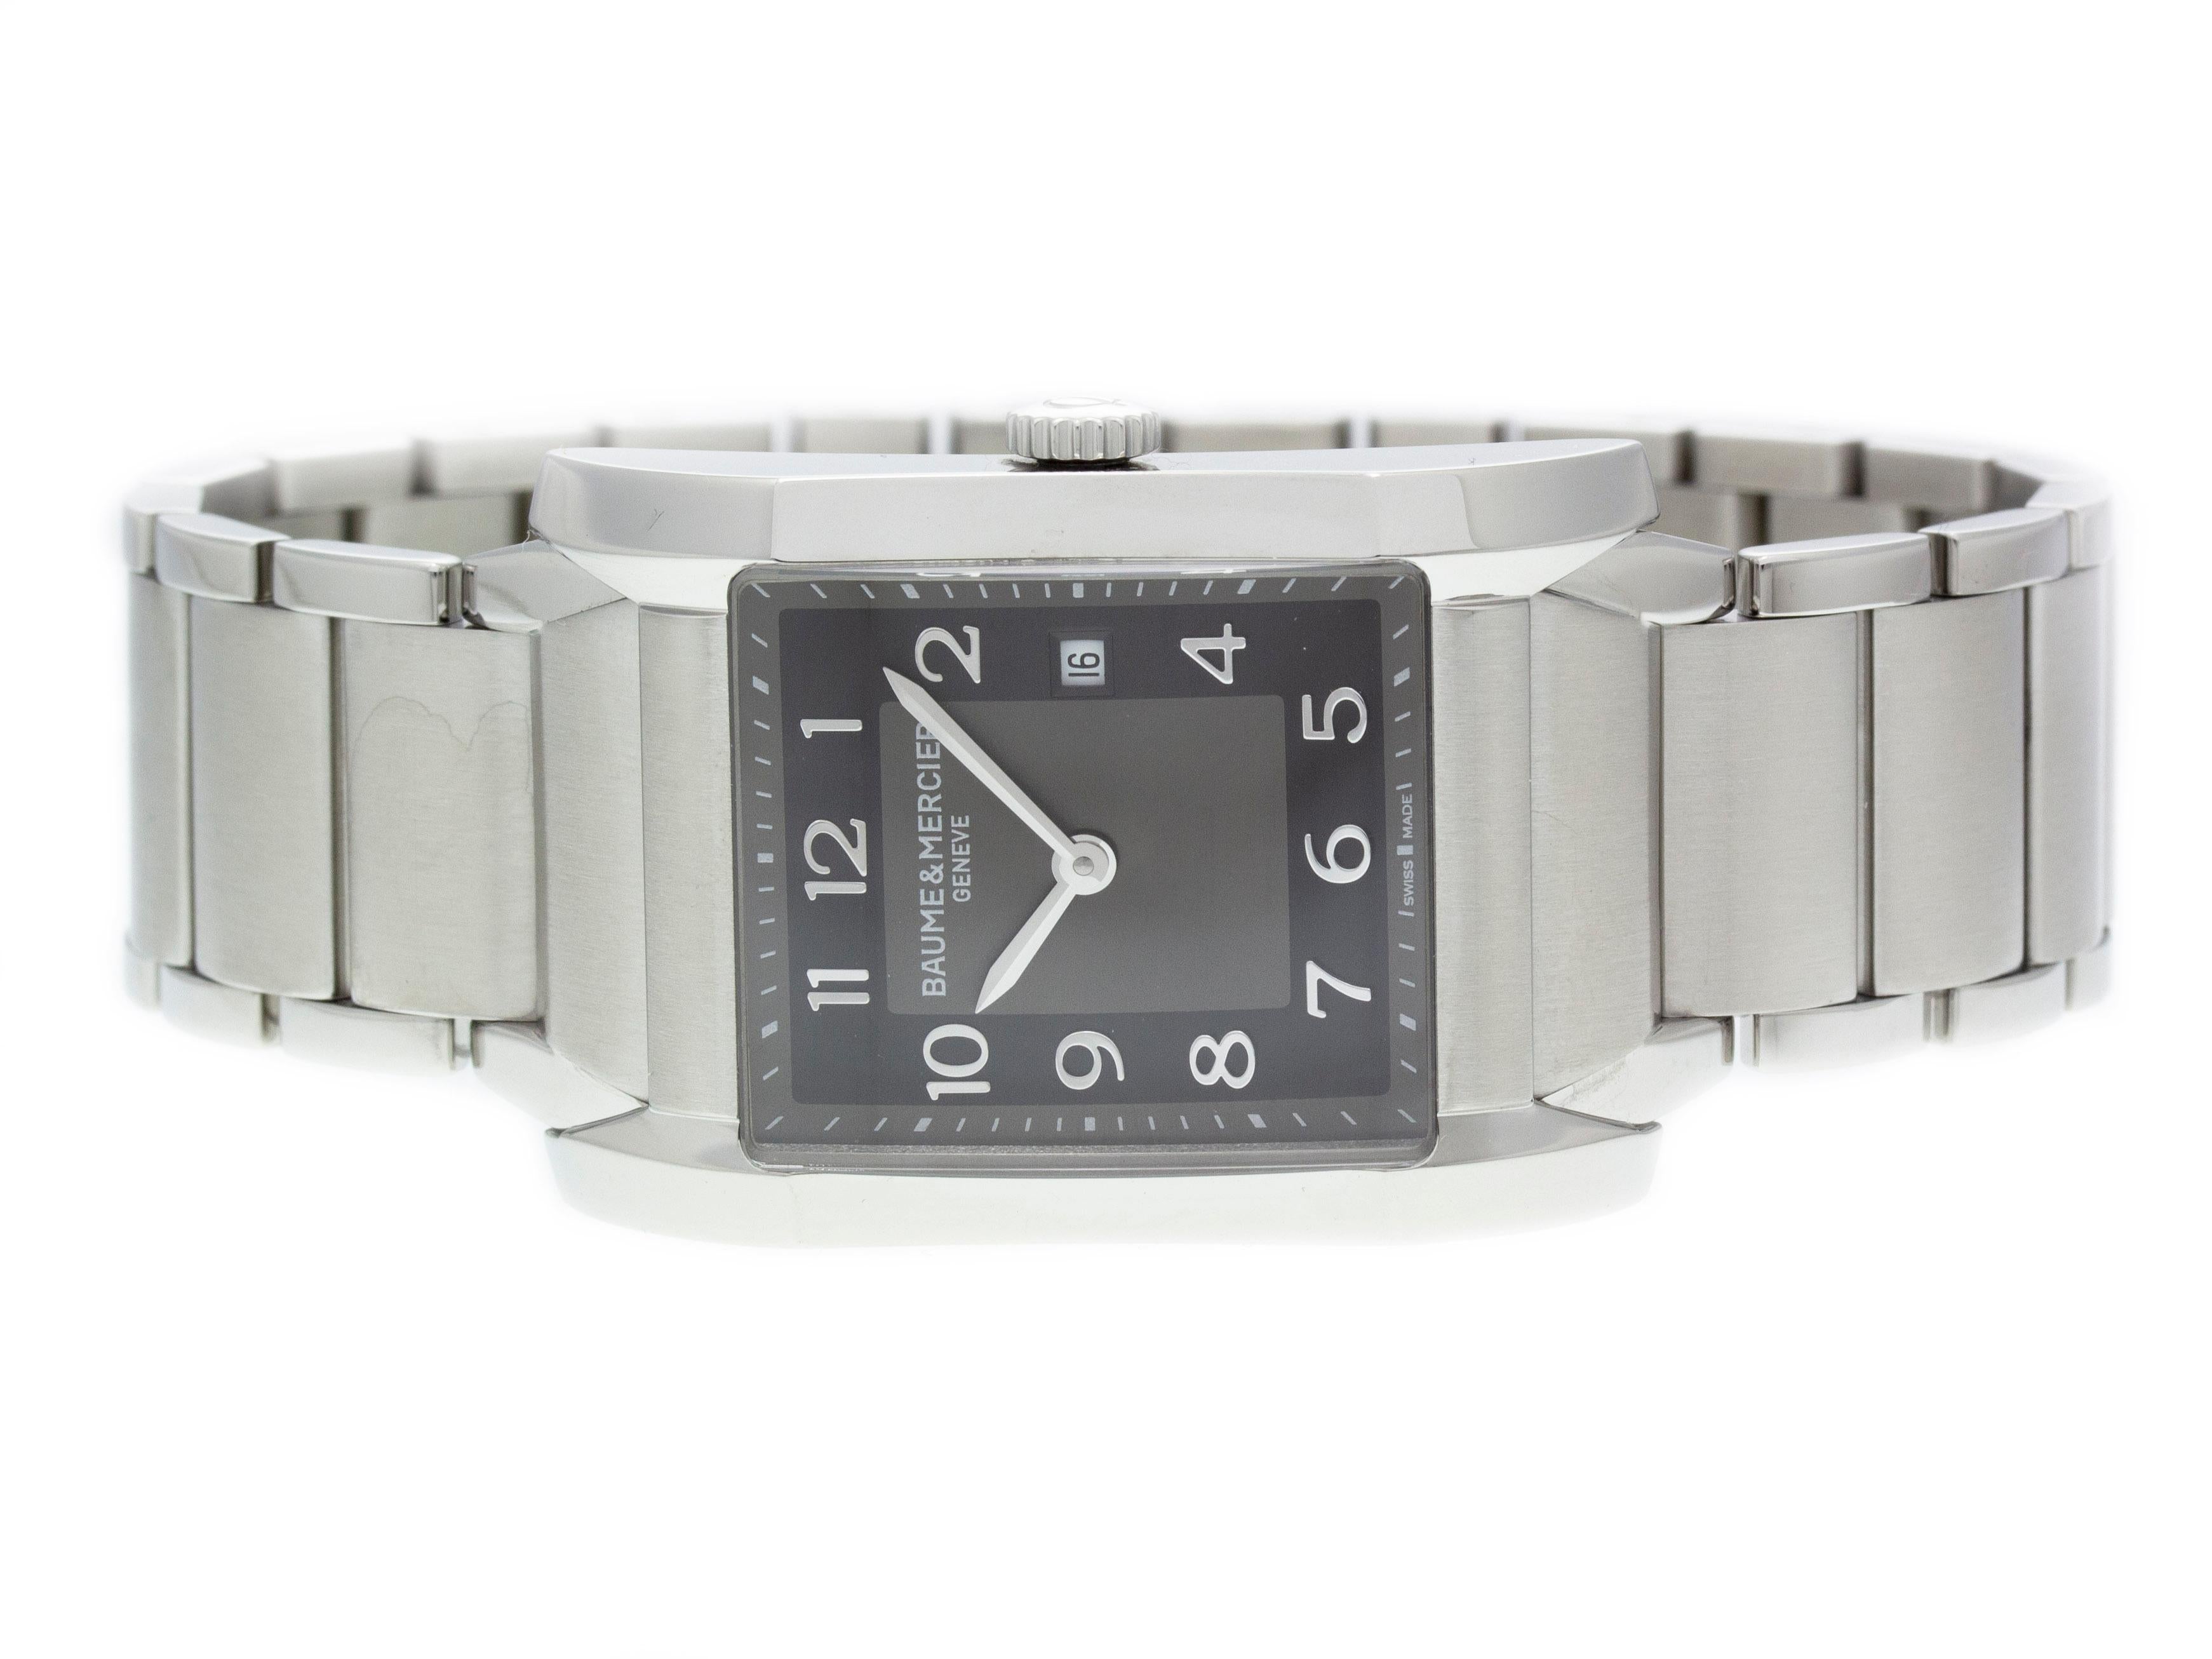 Stainless steel Baume & Mercier Hampton quartz watch with a 27mm x 40mm case, black dial, and bracelet with folding clasp. Features include hours, minutes, and date. Comes with a Deluxe Gift Box and 2 Year Store Warranty.​

Brand	Baume &